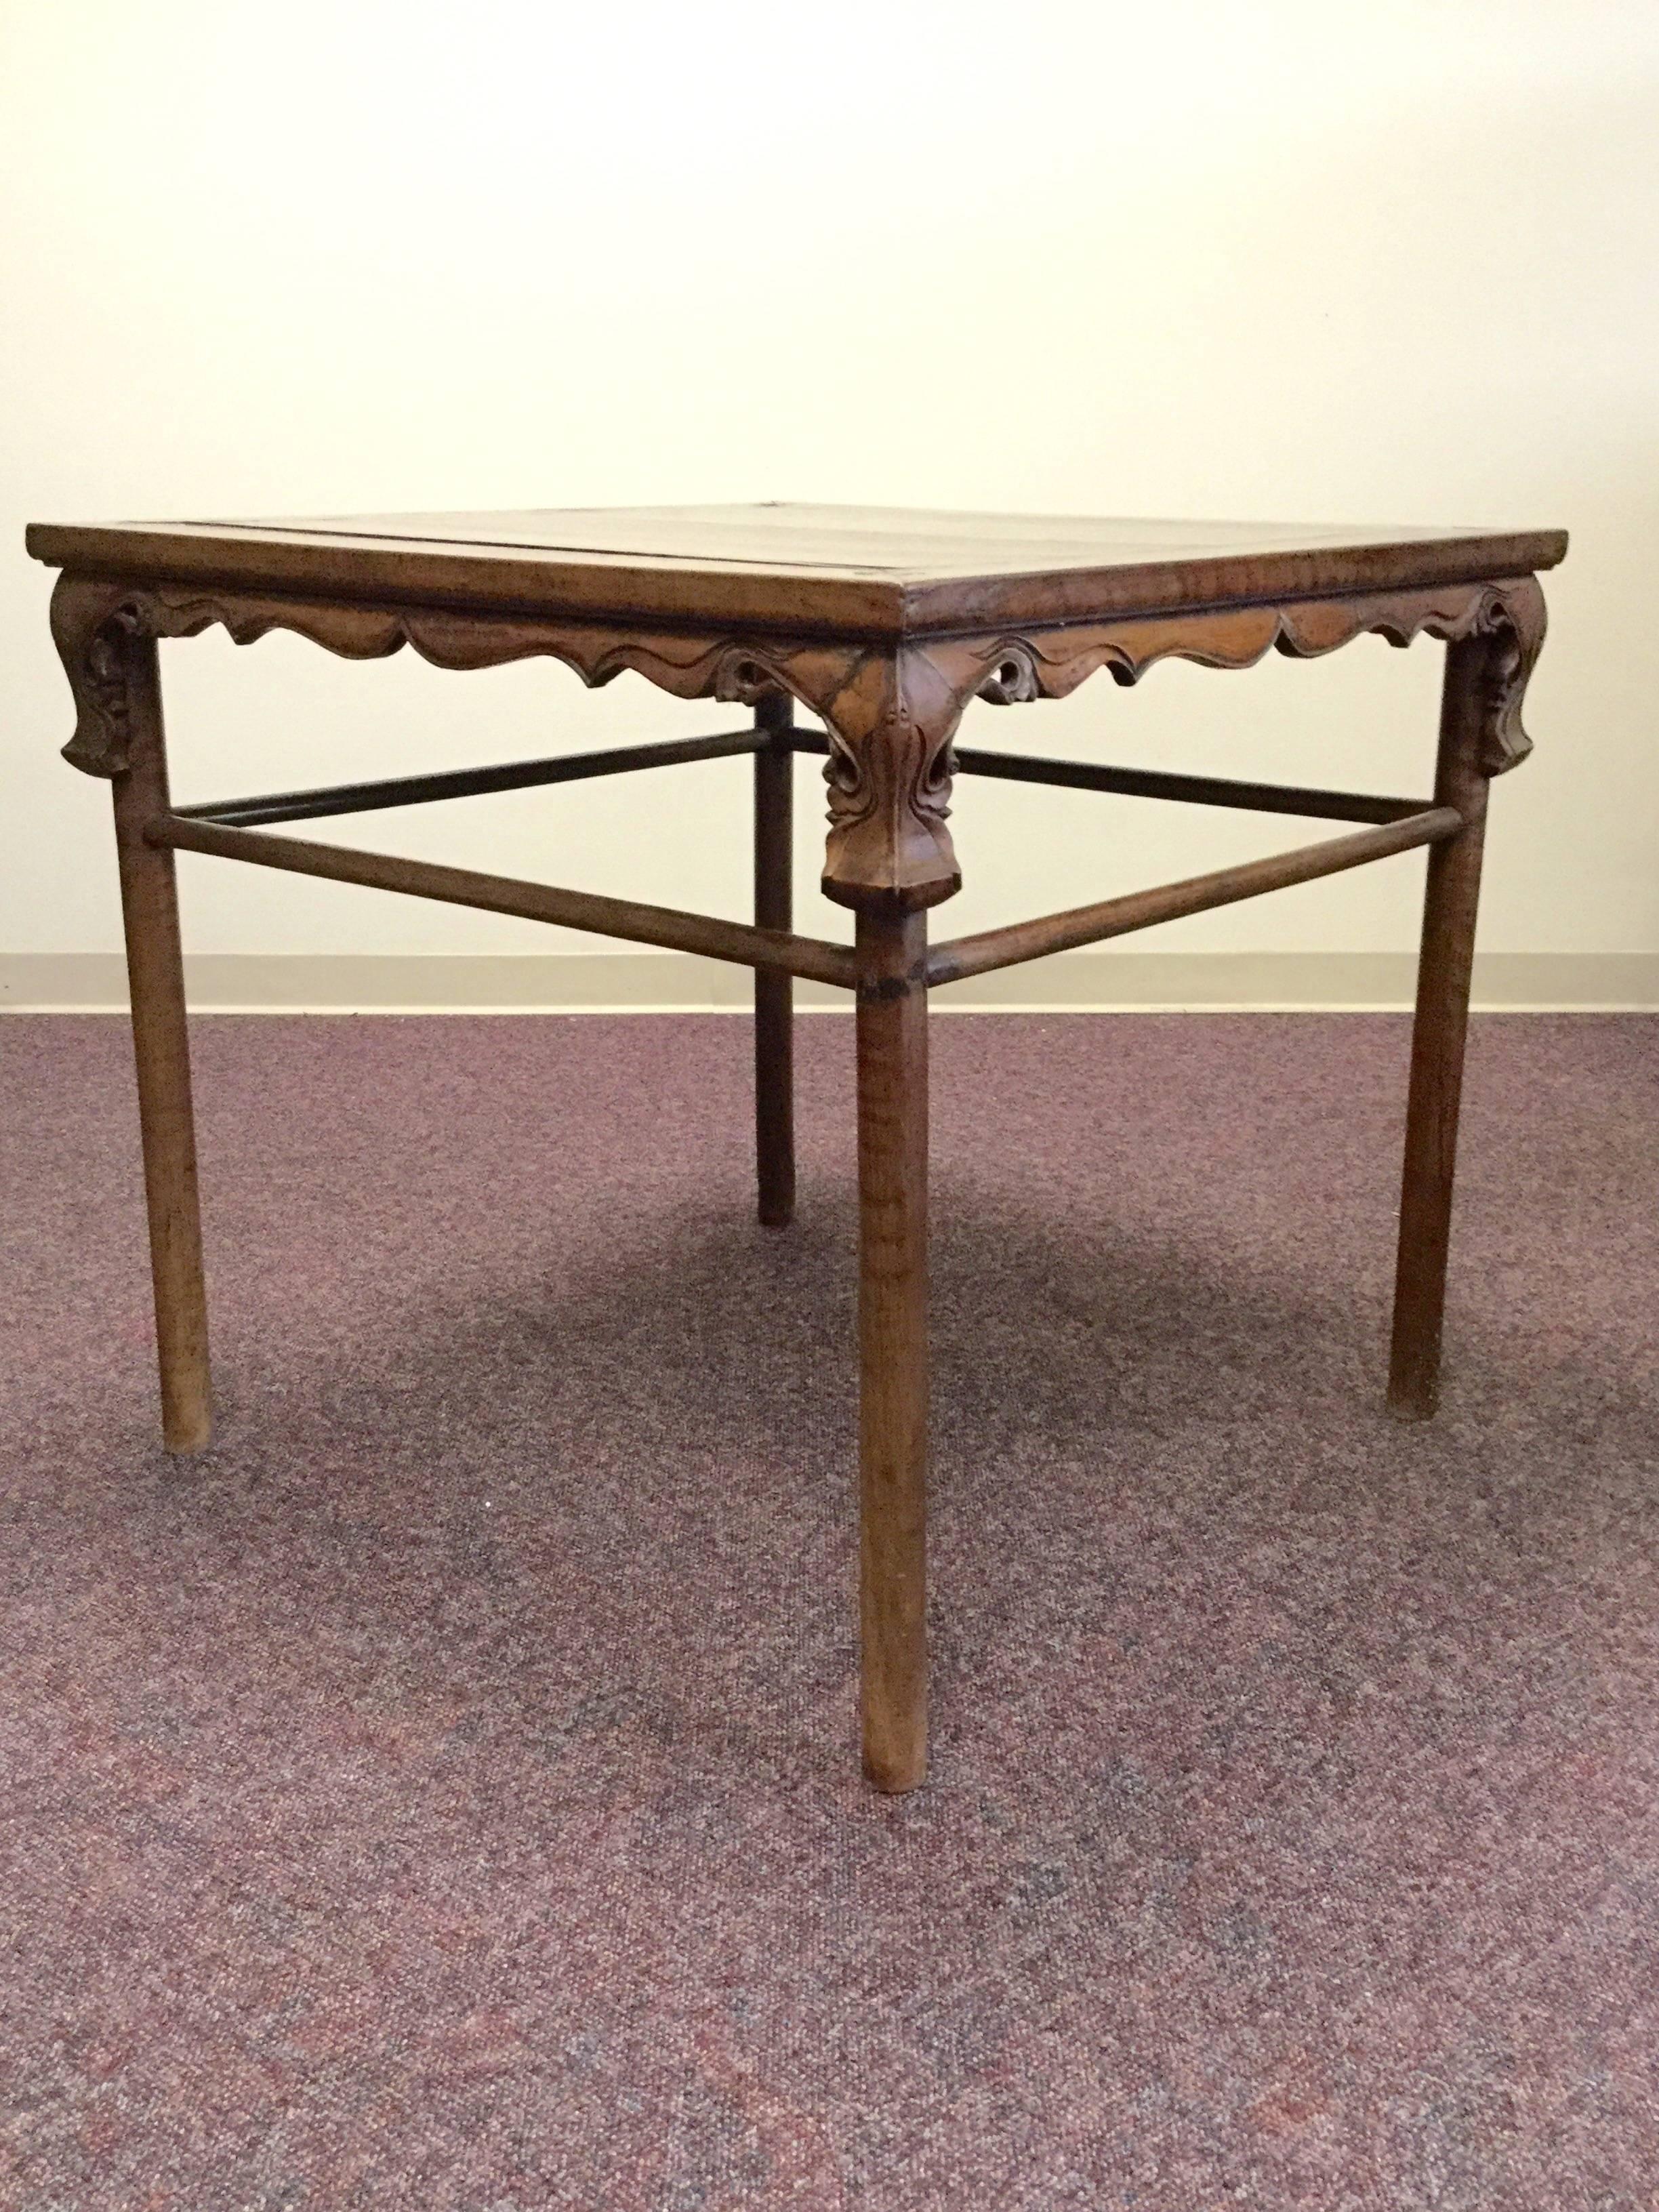 This fabulous table dates from the early 1800s and is hand-carved from walnut wood in Shanxi province. Notice the graceful non-linear curves of the carved details.